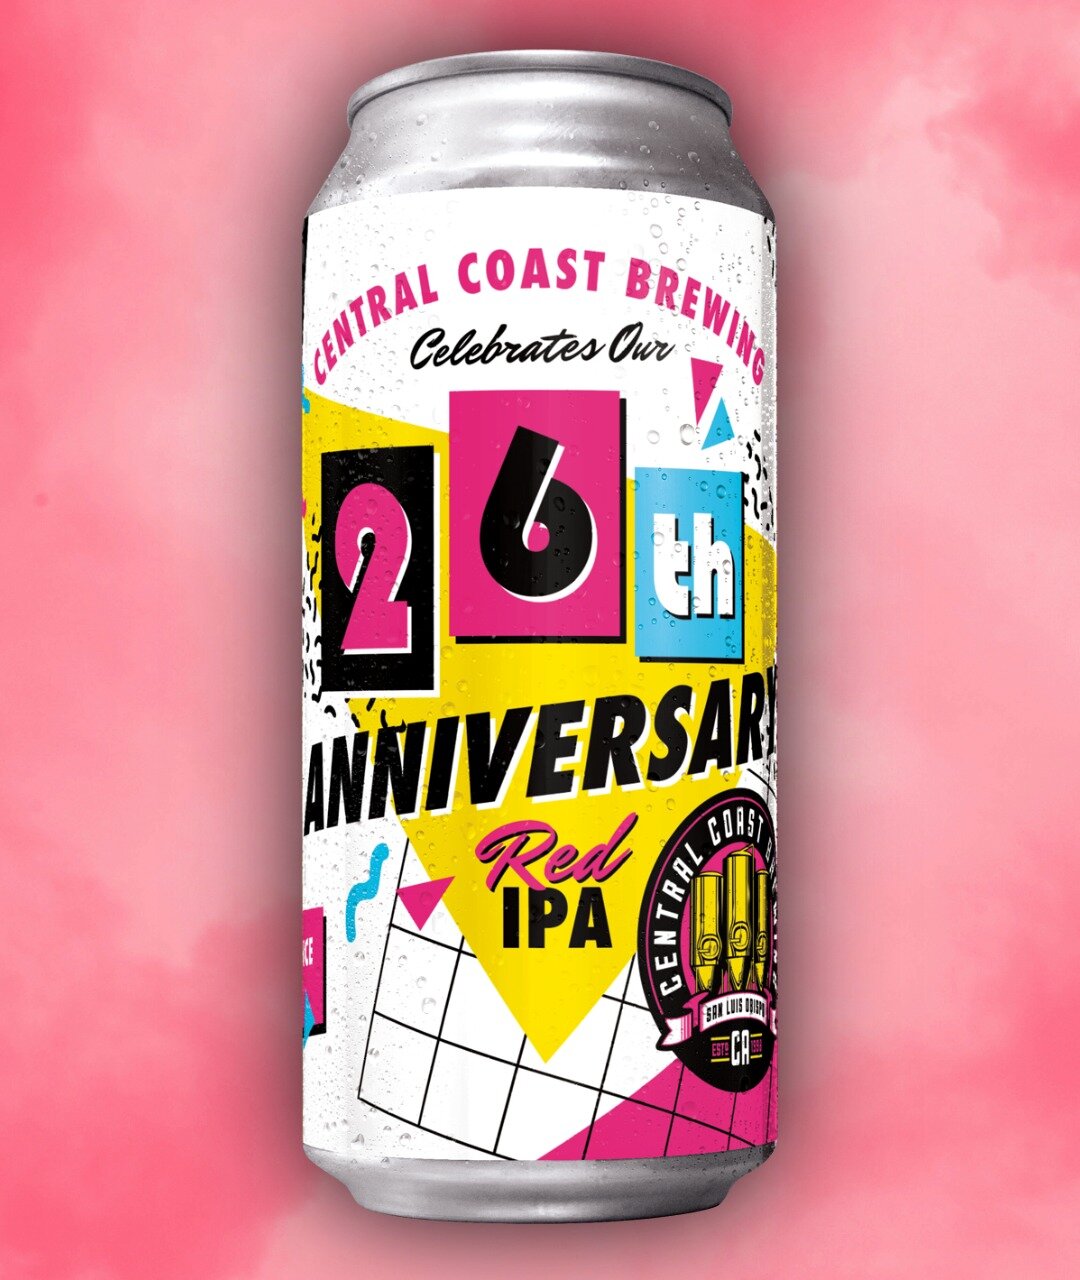 Step back in time with our latest creation: the totally rad 26th Anniversary Red IPA! Brewed with a mix of darker crystal malts, it brings a groovy balance of sweetness, caramel vibes, and hints of dark fruit. Catch this nostalgic brew at our slammin